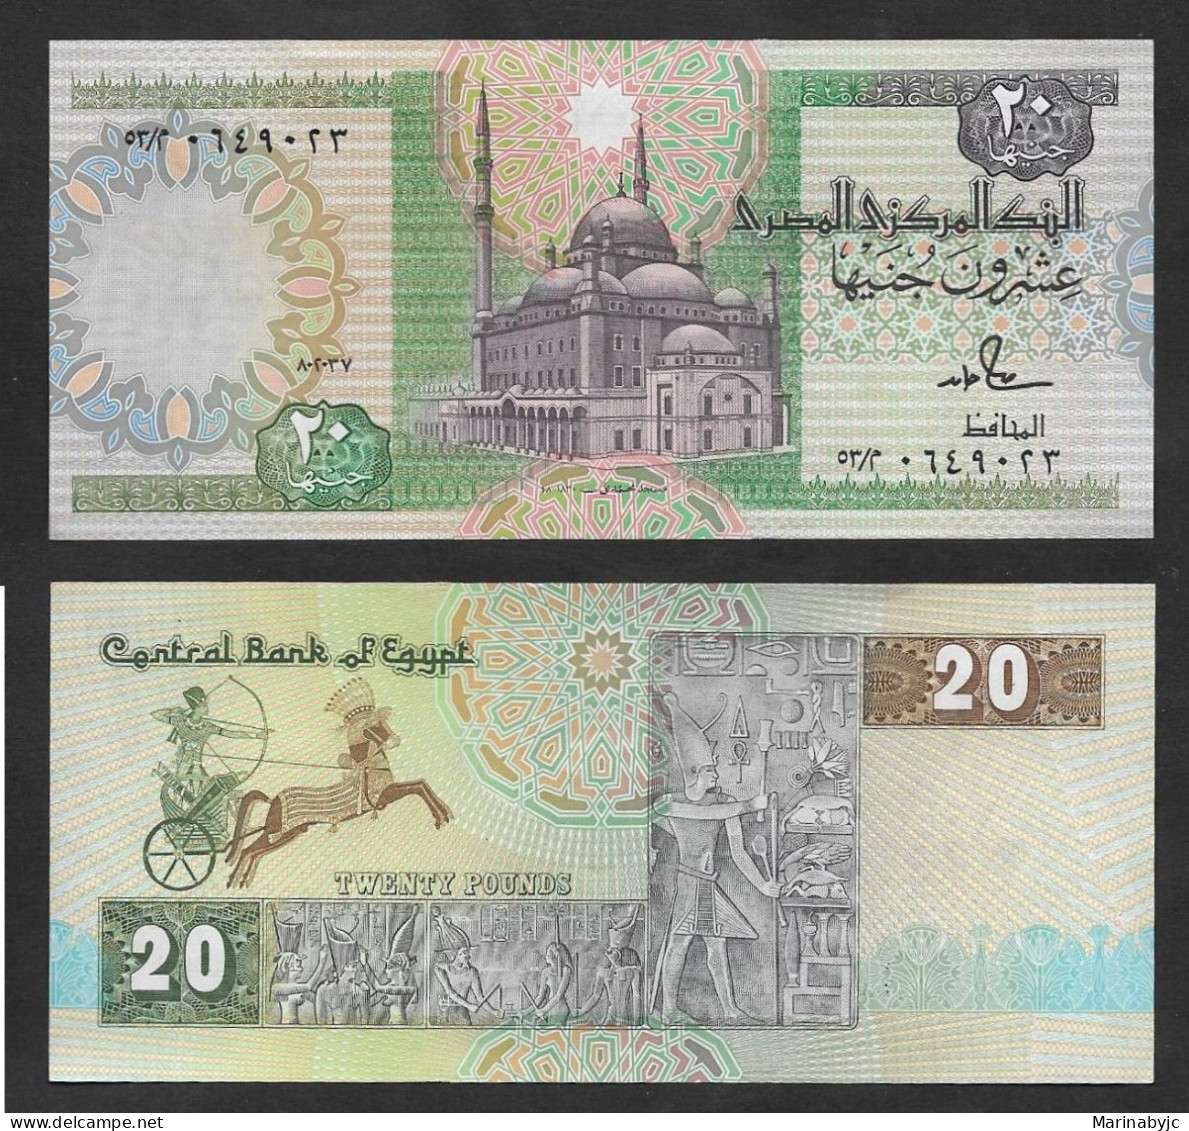 SE)2001 EGYPT, 10 POUND BANKNOTE OF THE CENTRAL BANK OF EGYPT, WITH REVERSE, VF - Usados